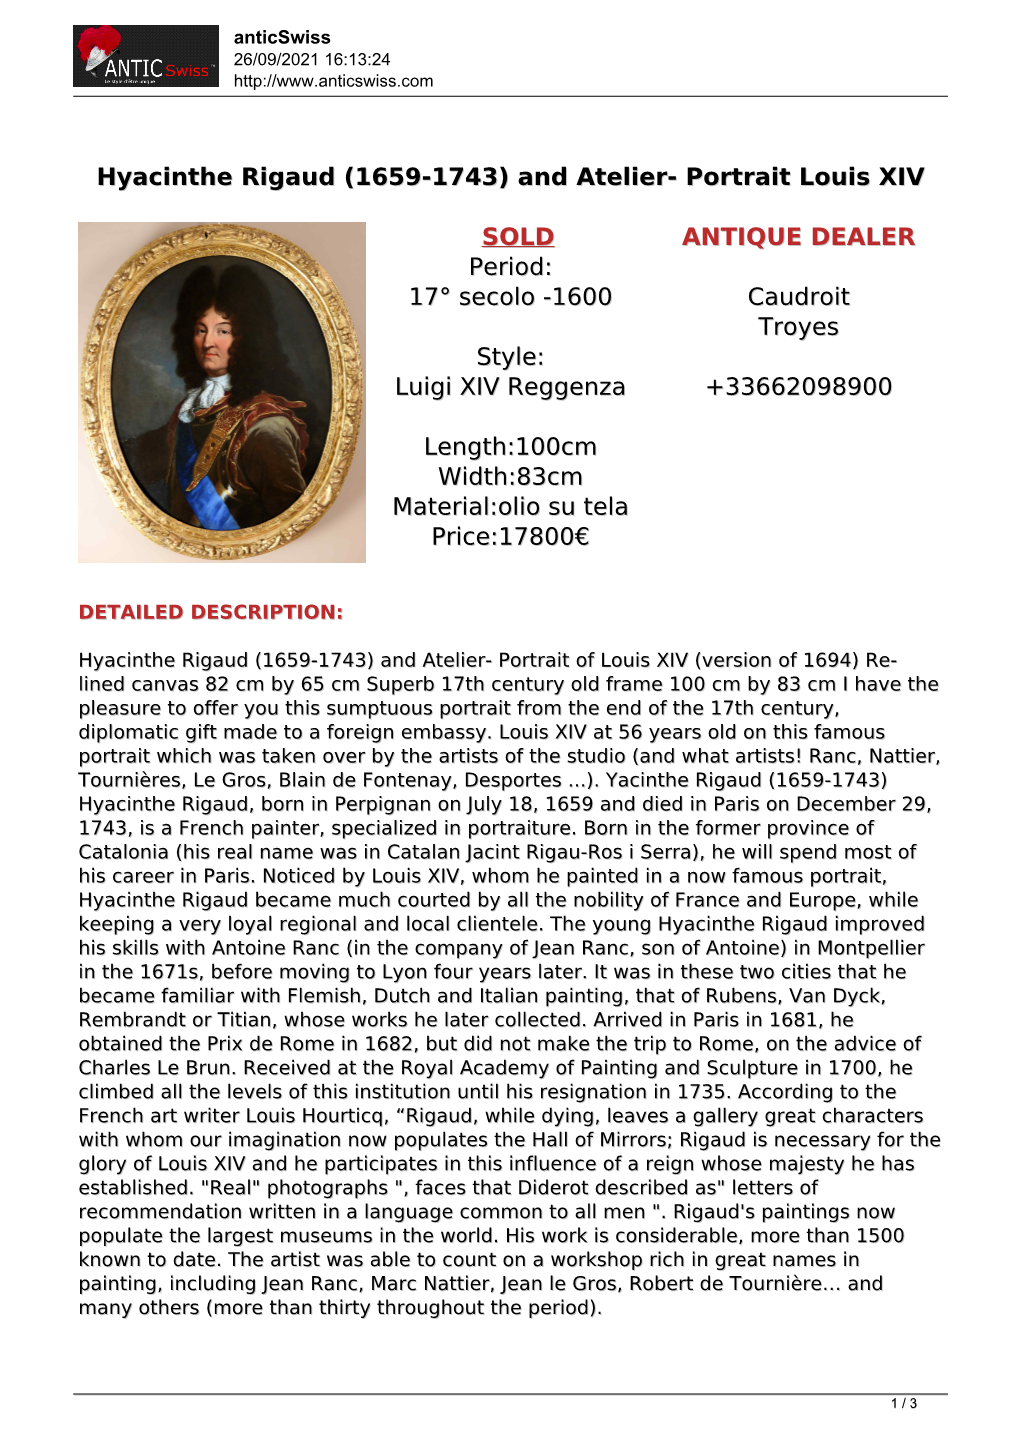 Hyacinthe Rigaud (1659-1743) and Atelier- Portrait Louis XIV